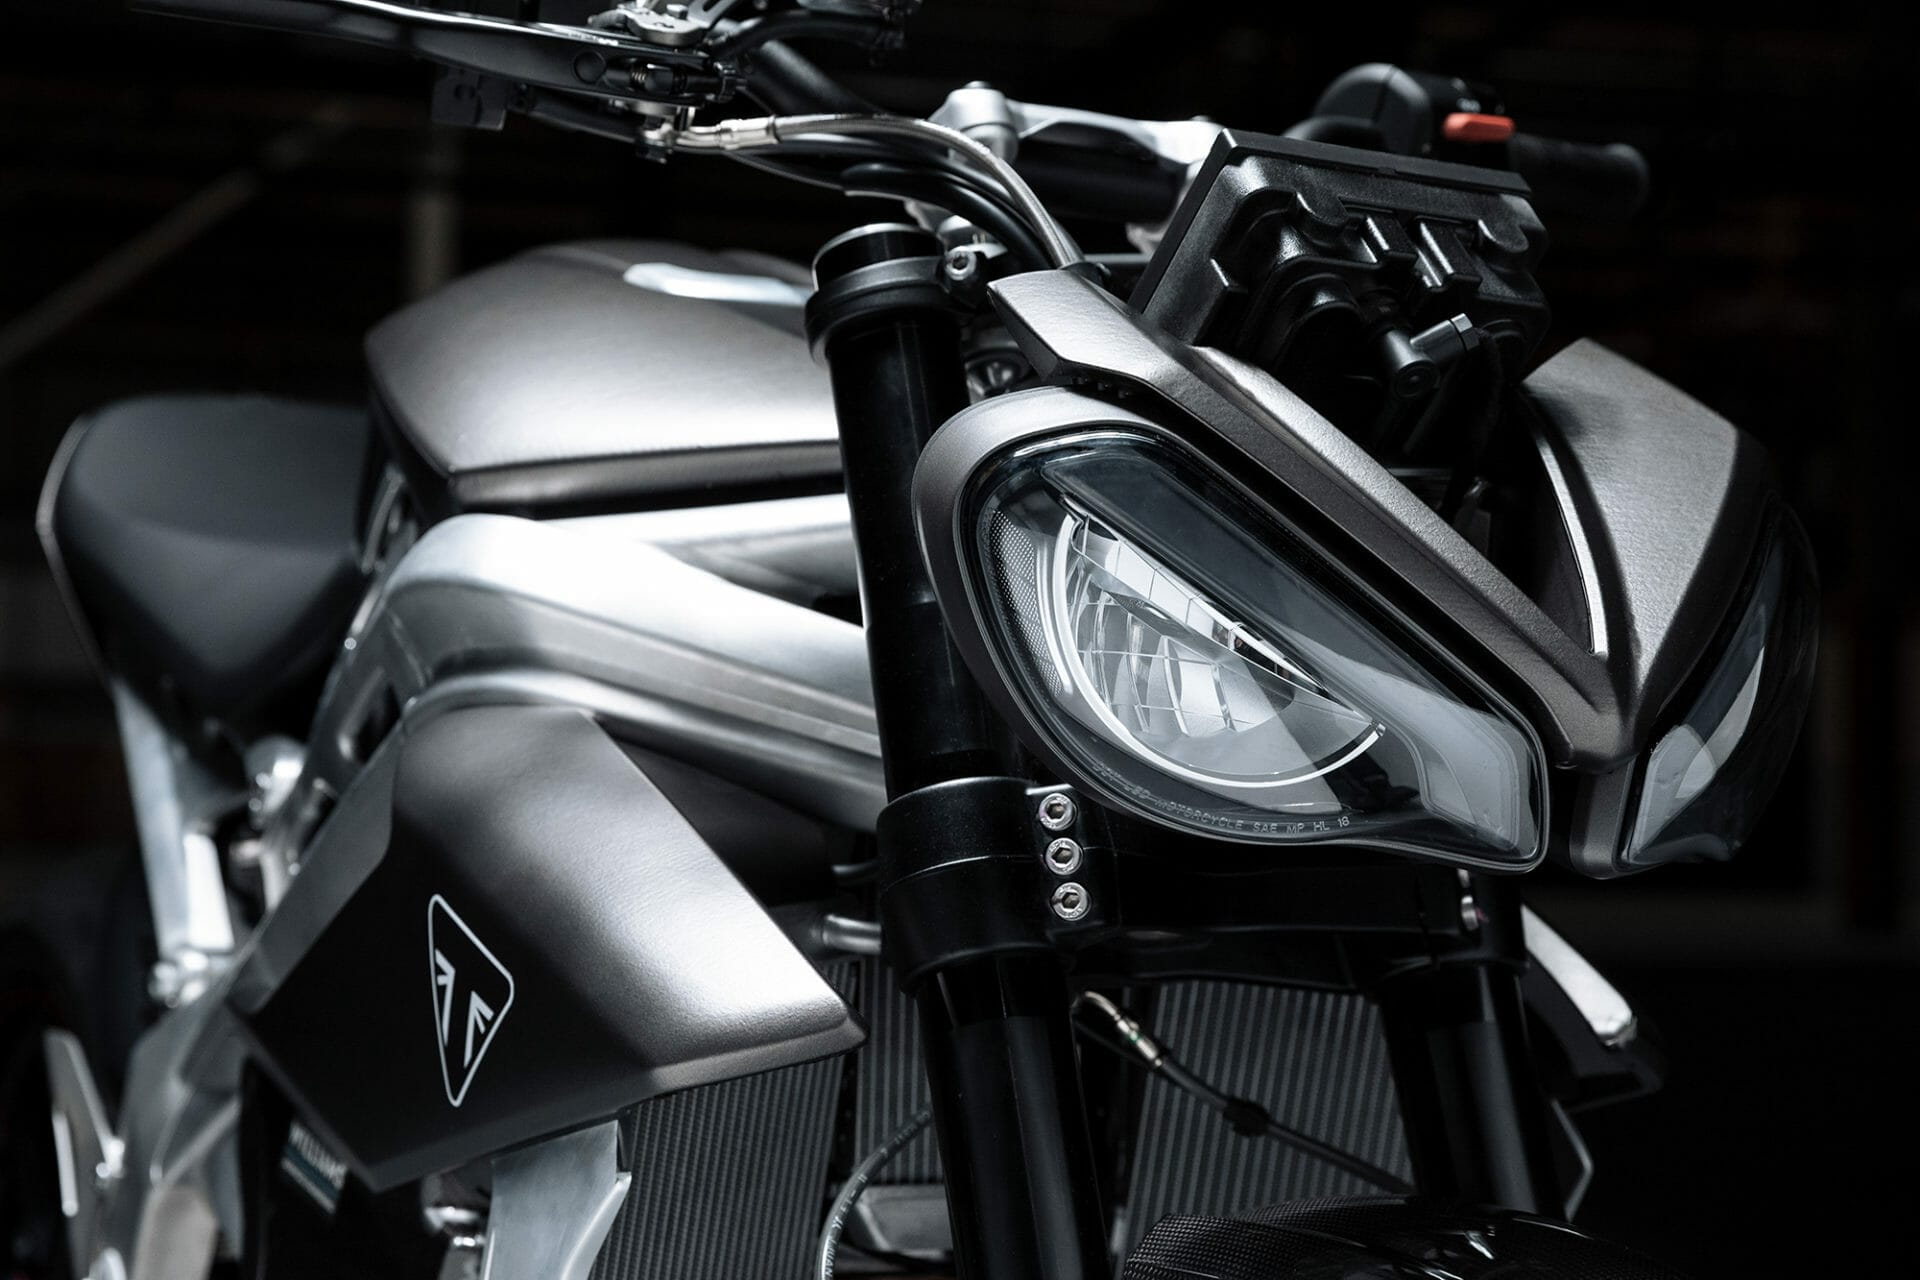 Triumph Project TE-1 - Presentation is coming soon - MOTORCYCLES.NEWS